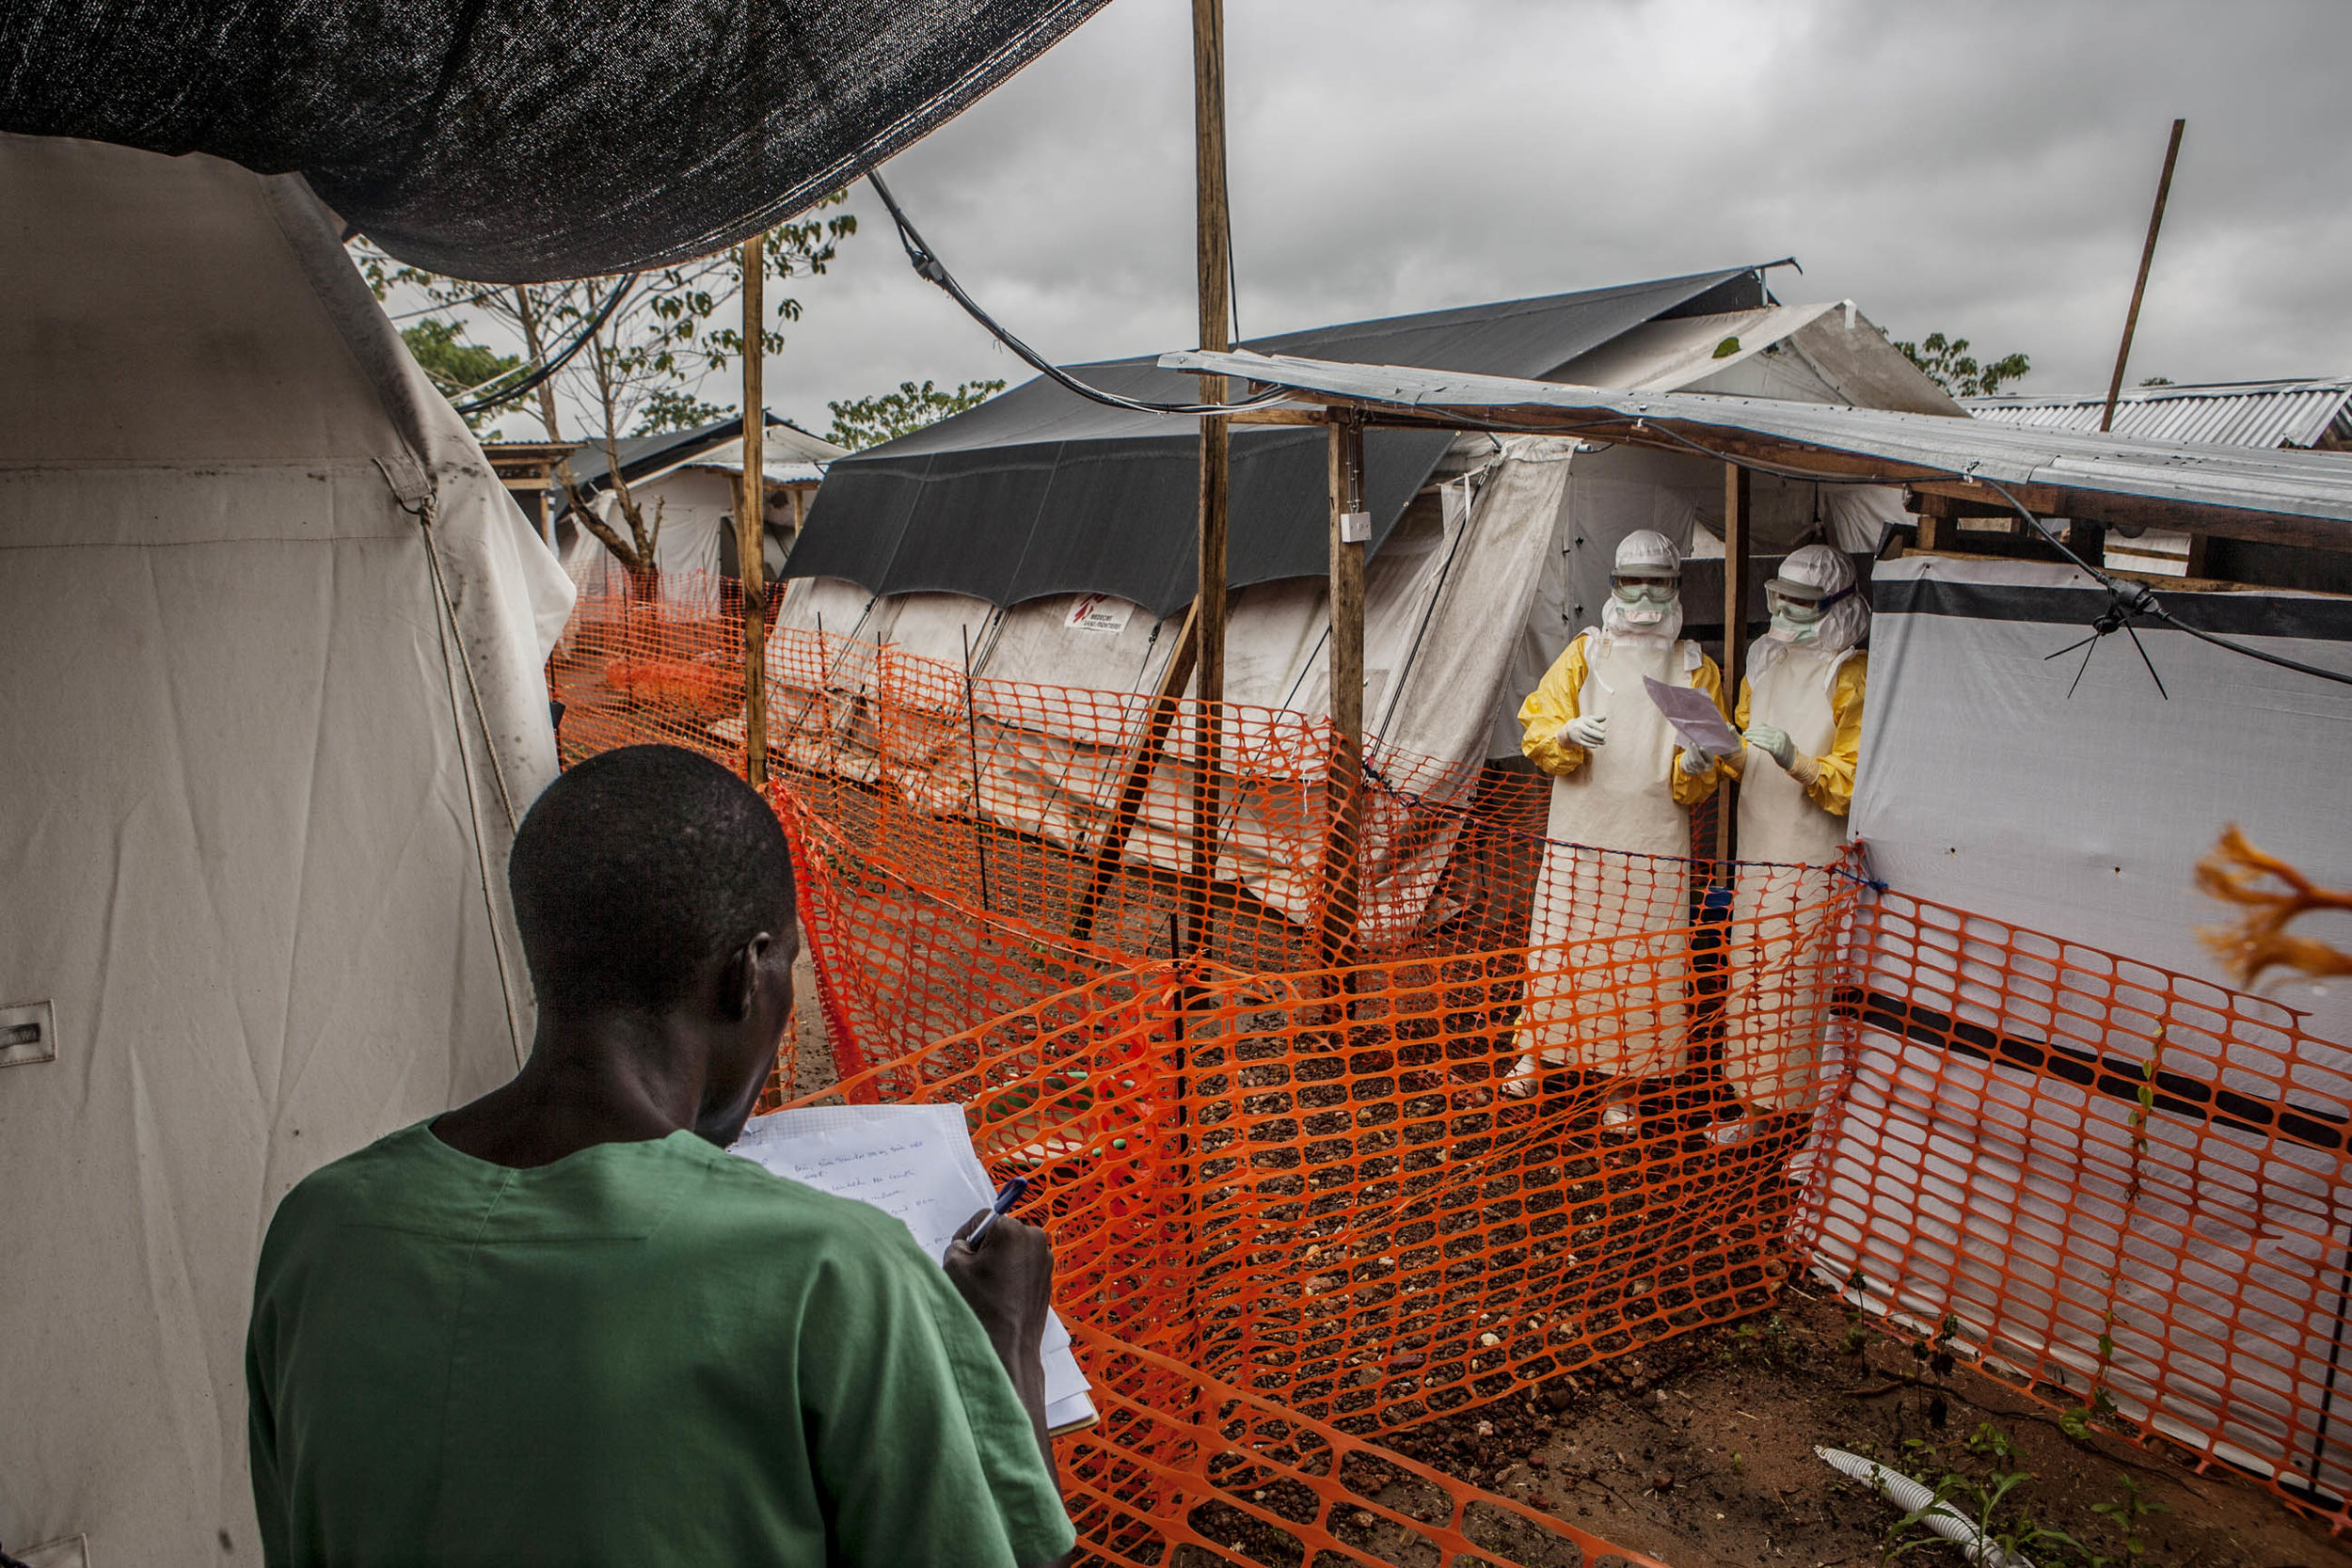  Doctors Without Borders medical staff discuss patient status across an established safety cordon in an Ebola treatment center in Kailahun, Sierra Leone on Sunday, August 17, 2014. Those in masks stand in the "high risk" zone where highly contagious 